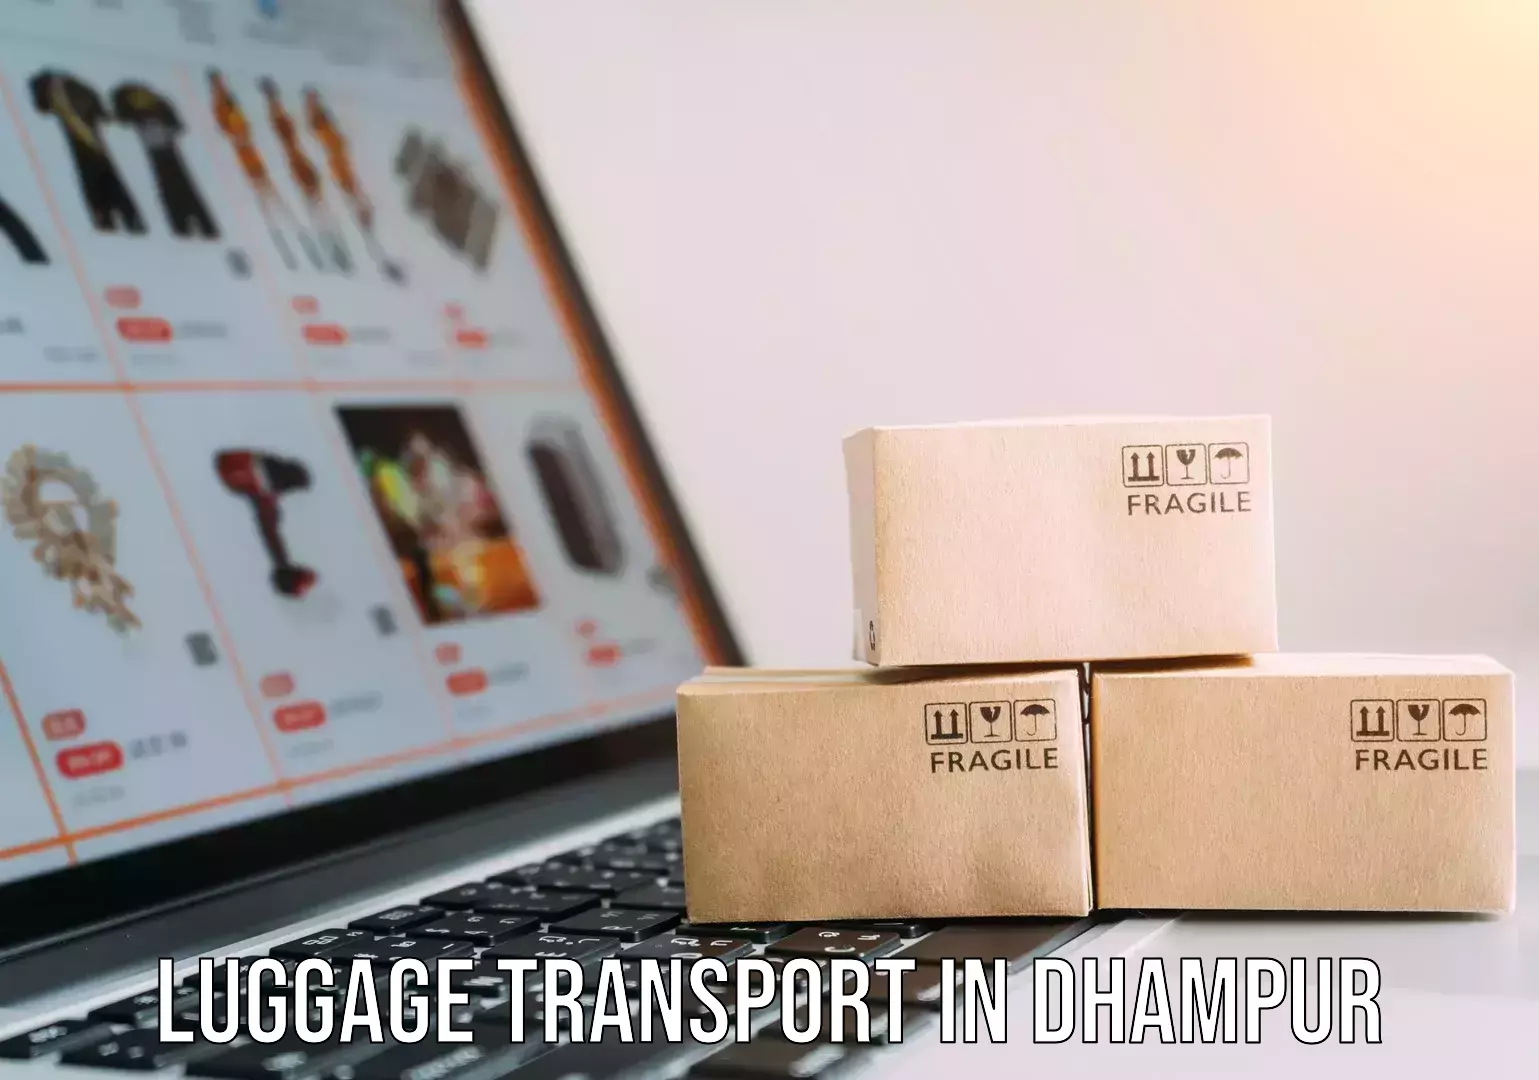 Luggage shipment tracking in Dhampur